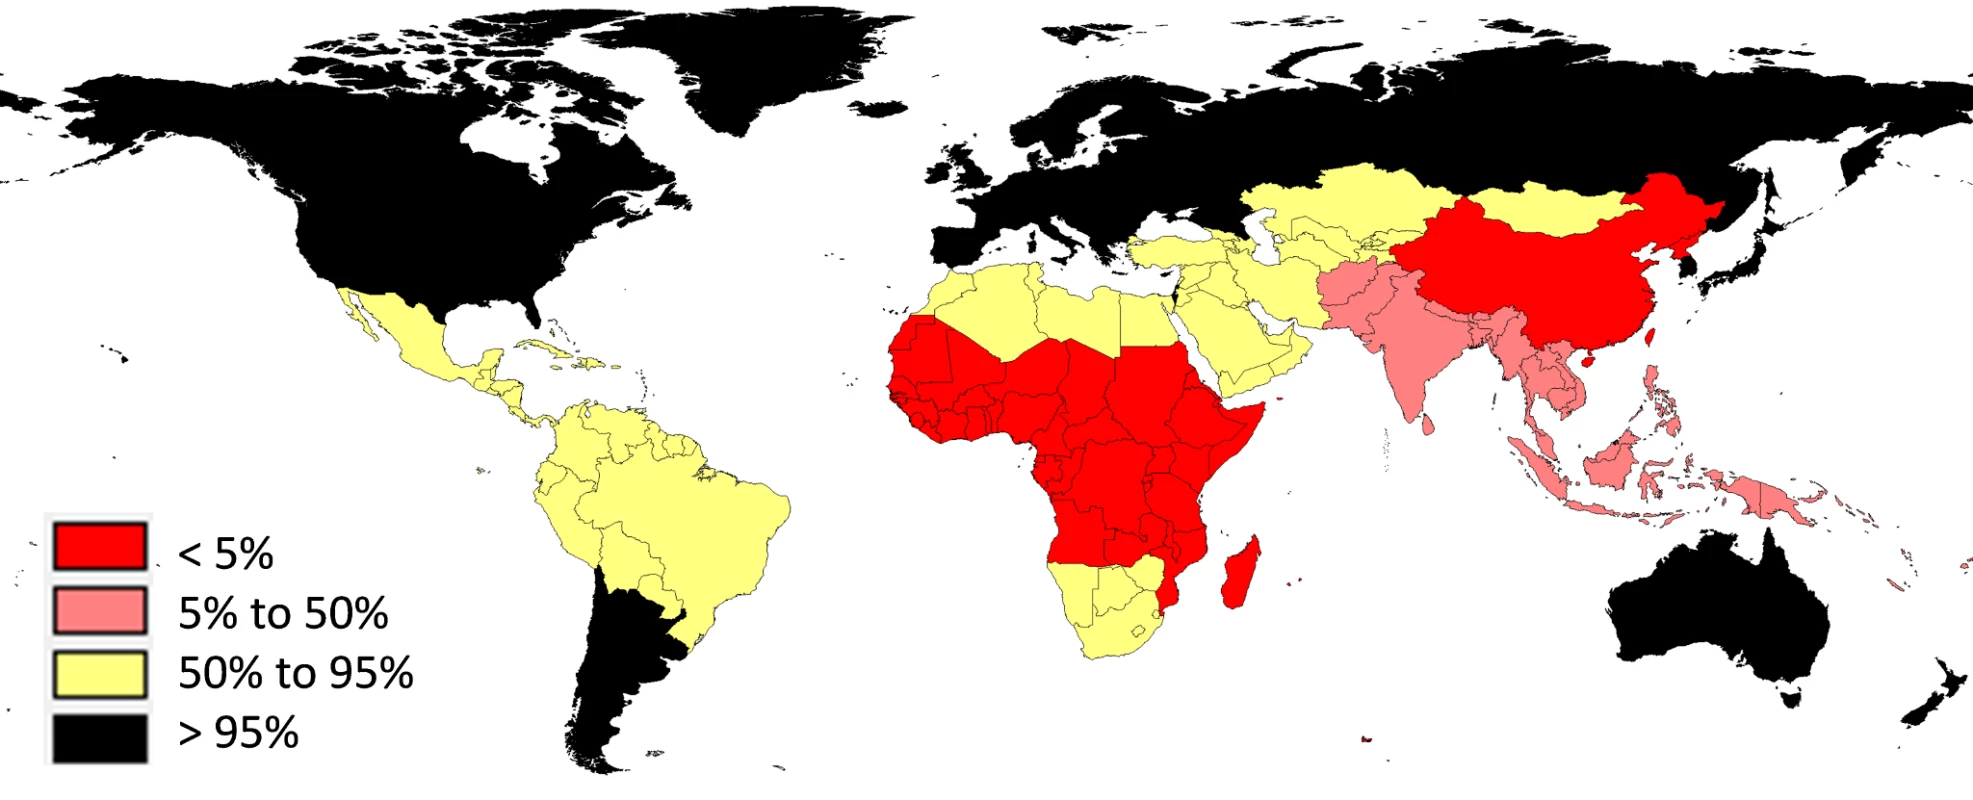 Proportions of deaths covered by vital registration, shown by GBD-2010 regions.